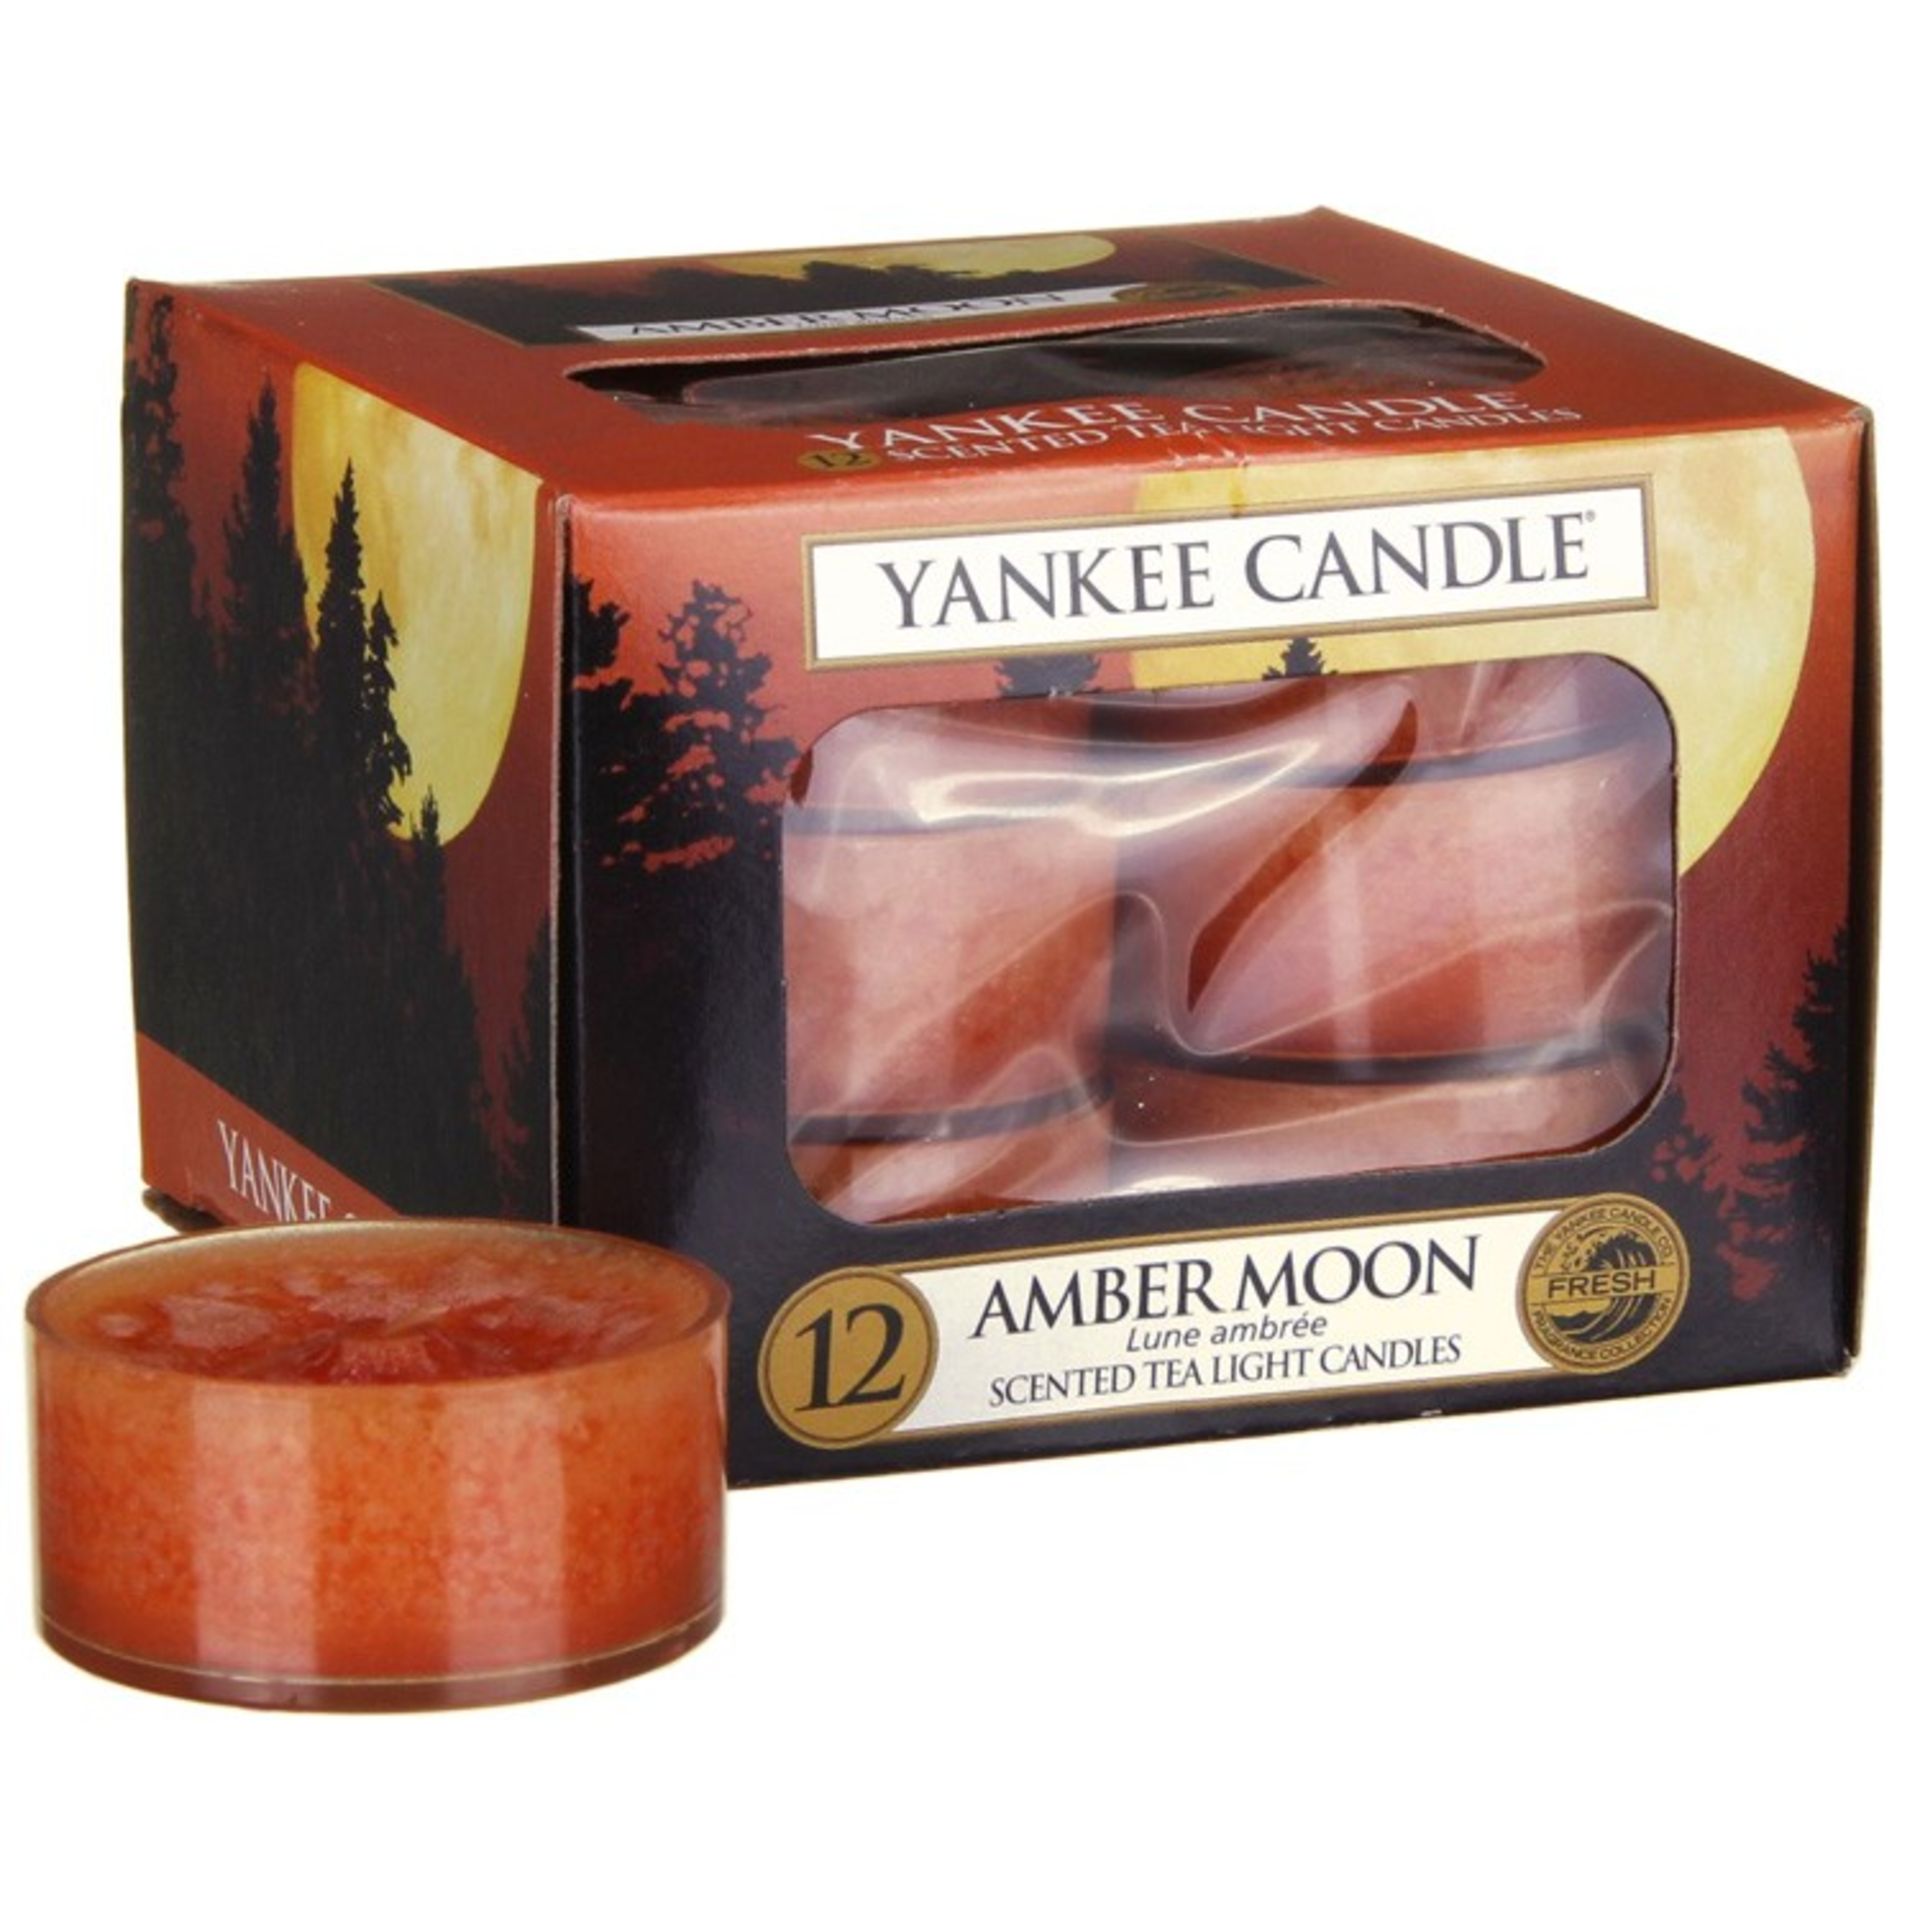 V *TRADE QTY* Brand New 12 Yankee Candle Scented Tea Light Candles Amber Moon eBay Price £7.99 X 5